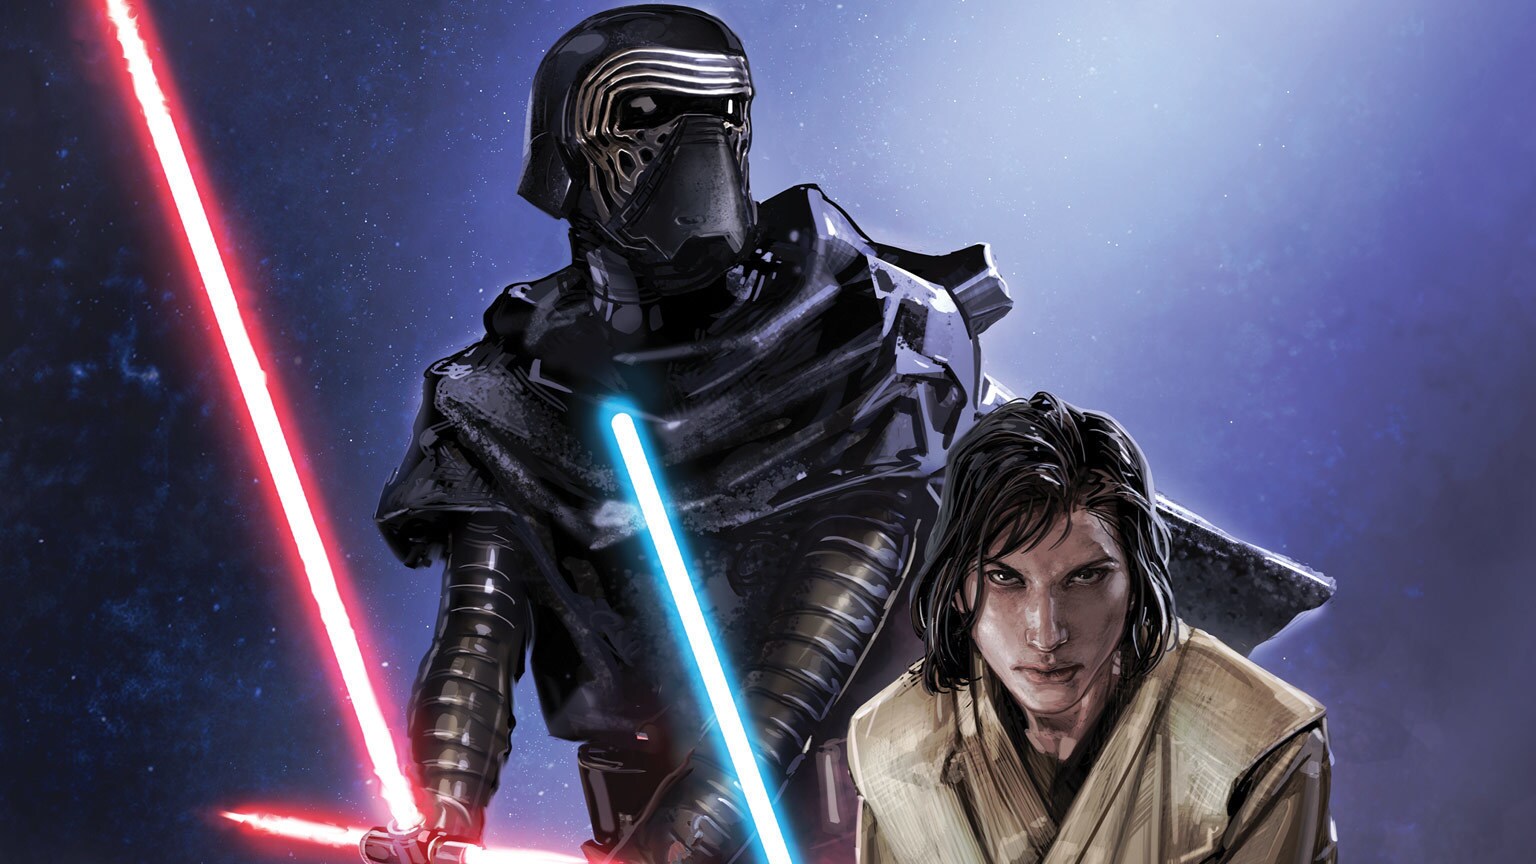 Ben Solo Seeks Out the Knights of Ren in The Rise of Kylo Ren #3 - Exclusive